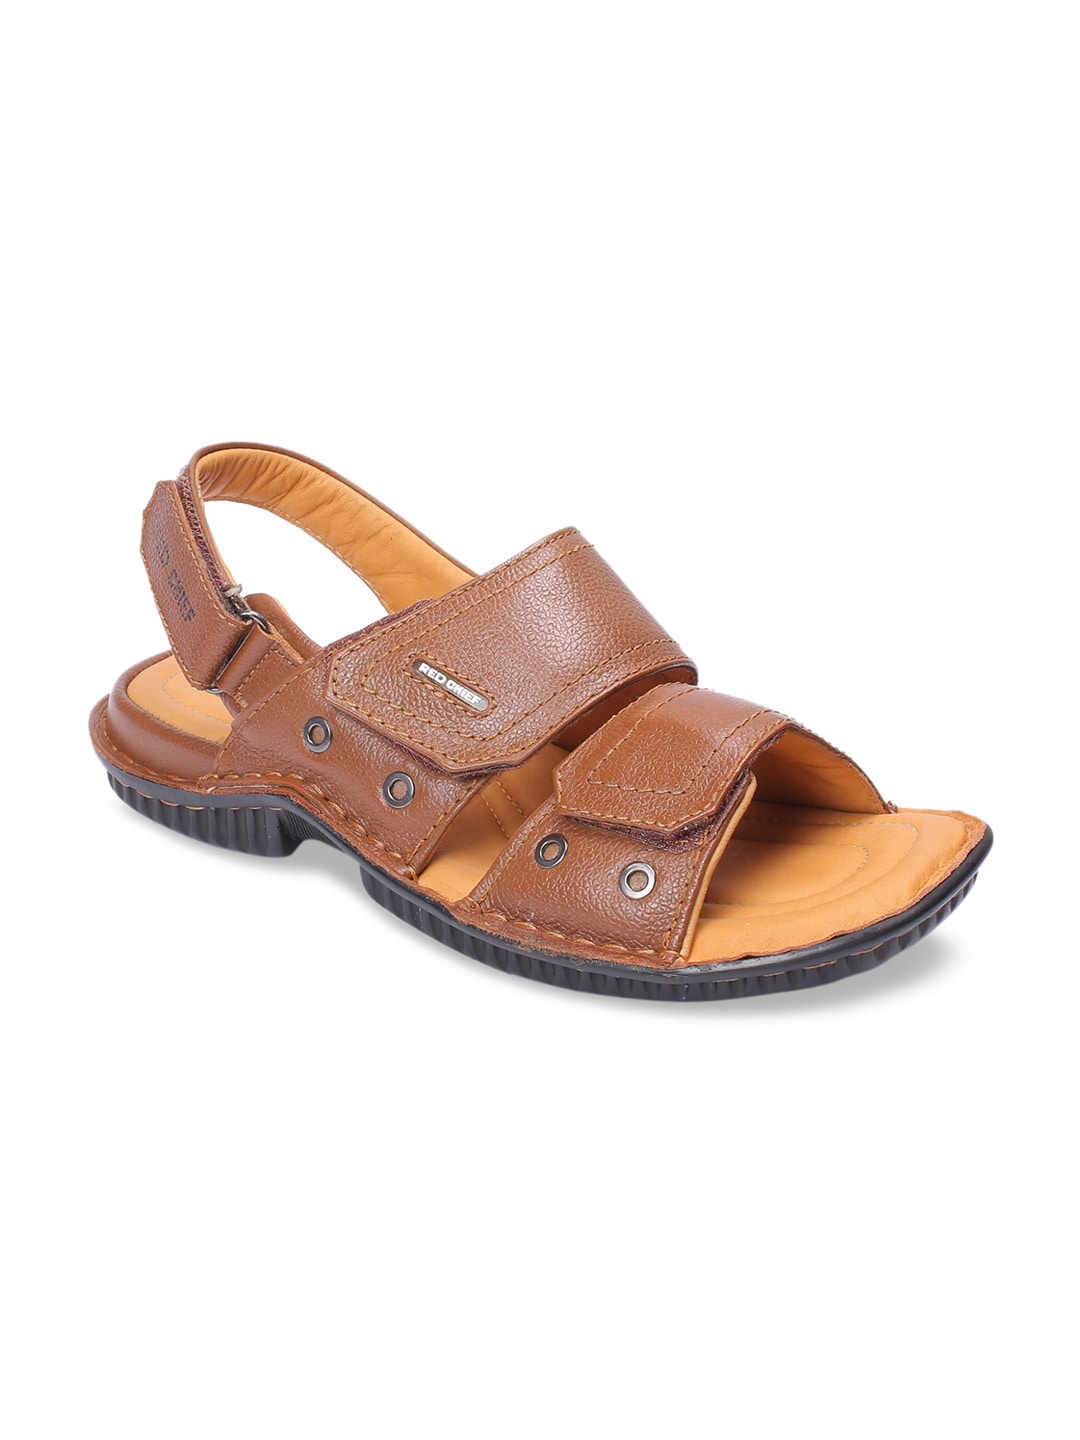 Buy Red Chief Tan Formal Sandals for Men at Best Price @ Tata CLiQ-anthinhphatland.vn